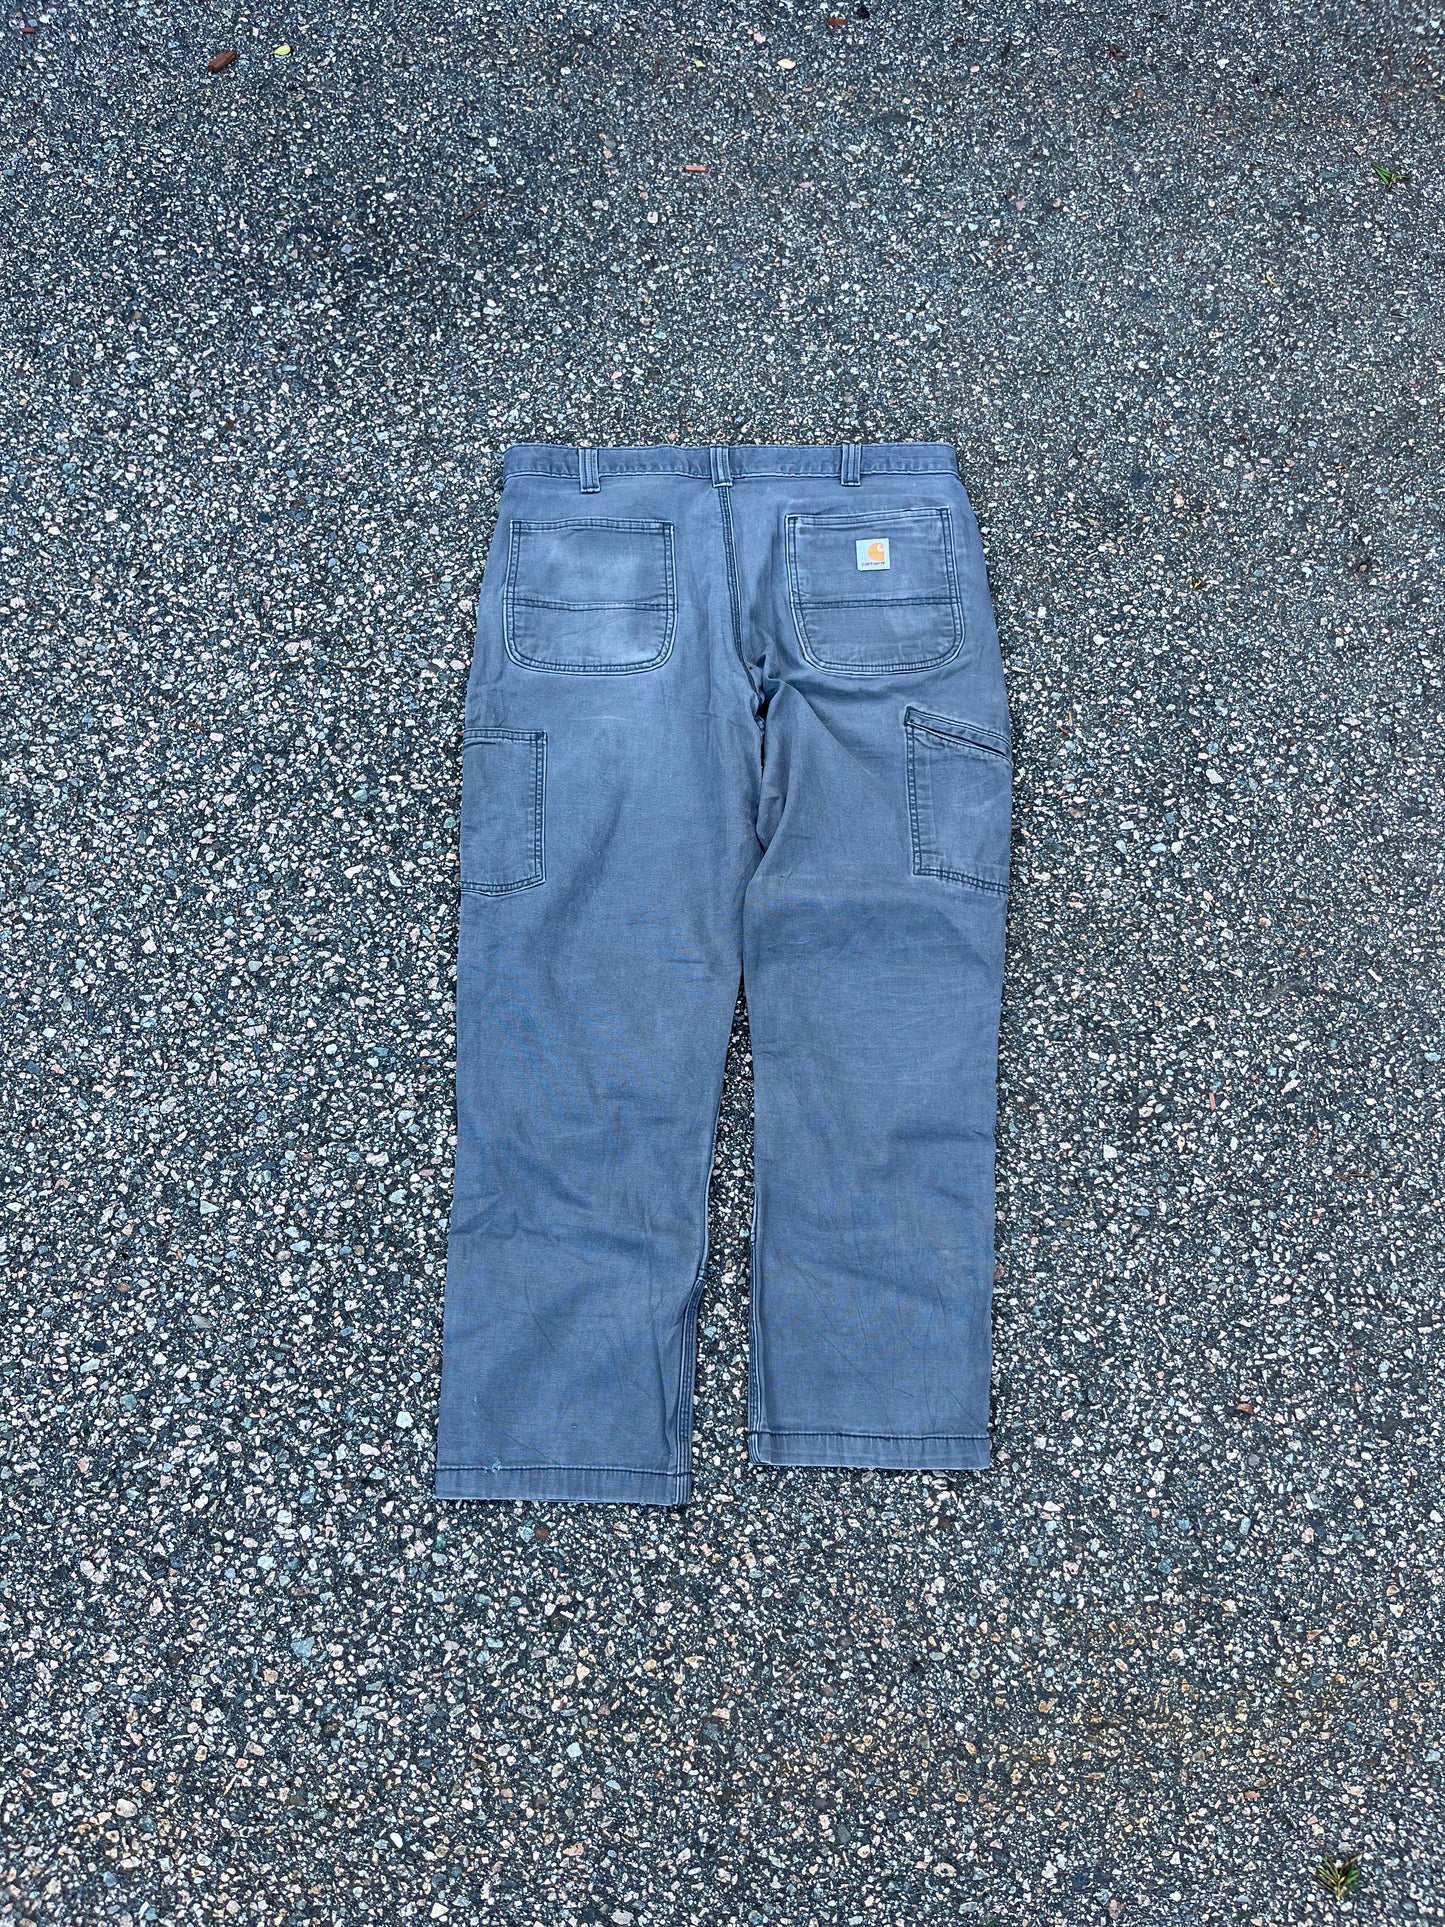 Faded Cement Grey Carhartt Double Knee Pants - 35 x 29